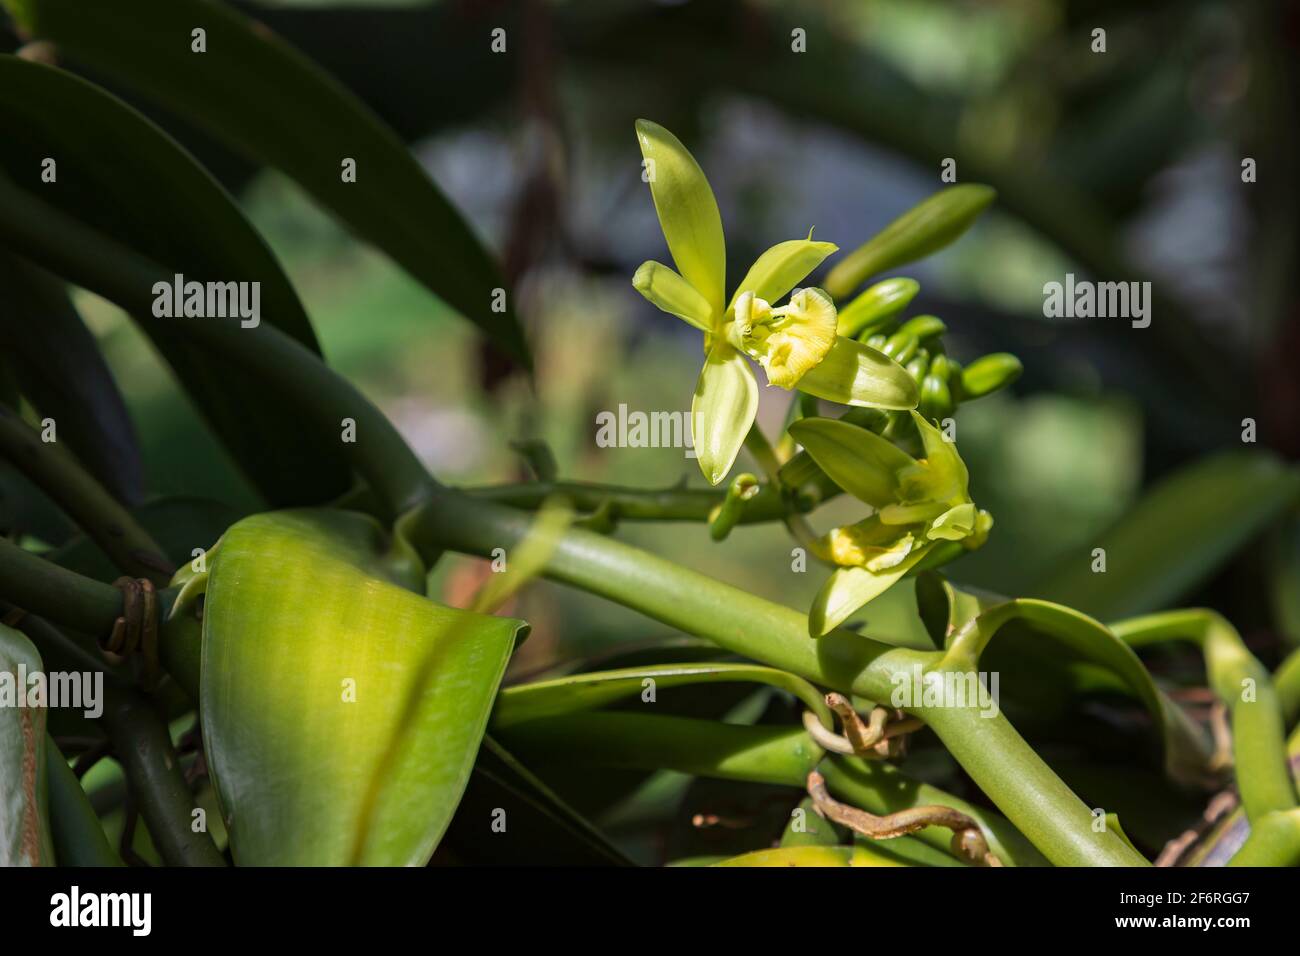 Bud of a vanilla plant in bright sunlight after hand pollination Stock Photo